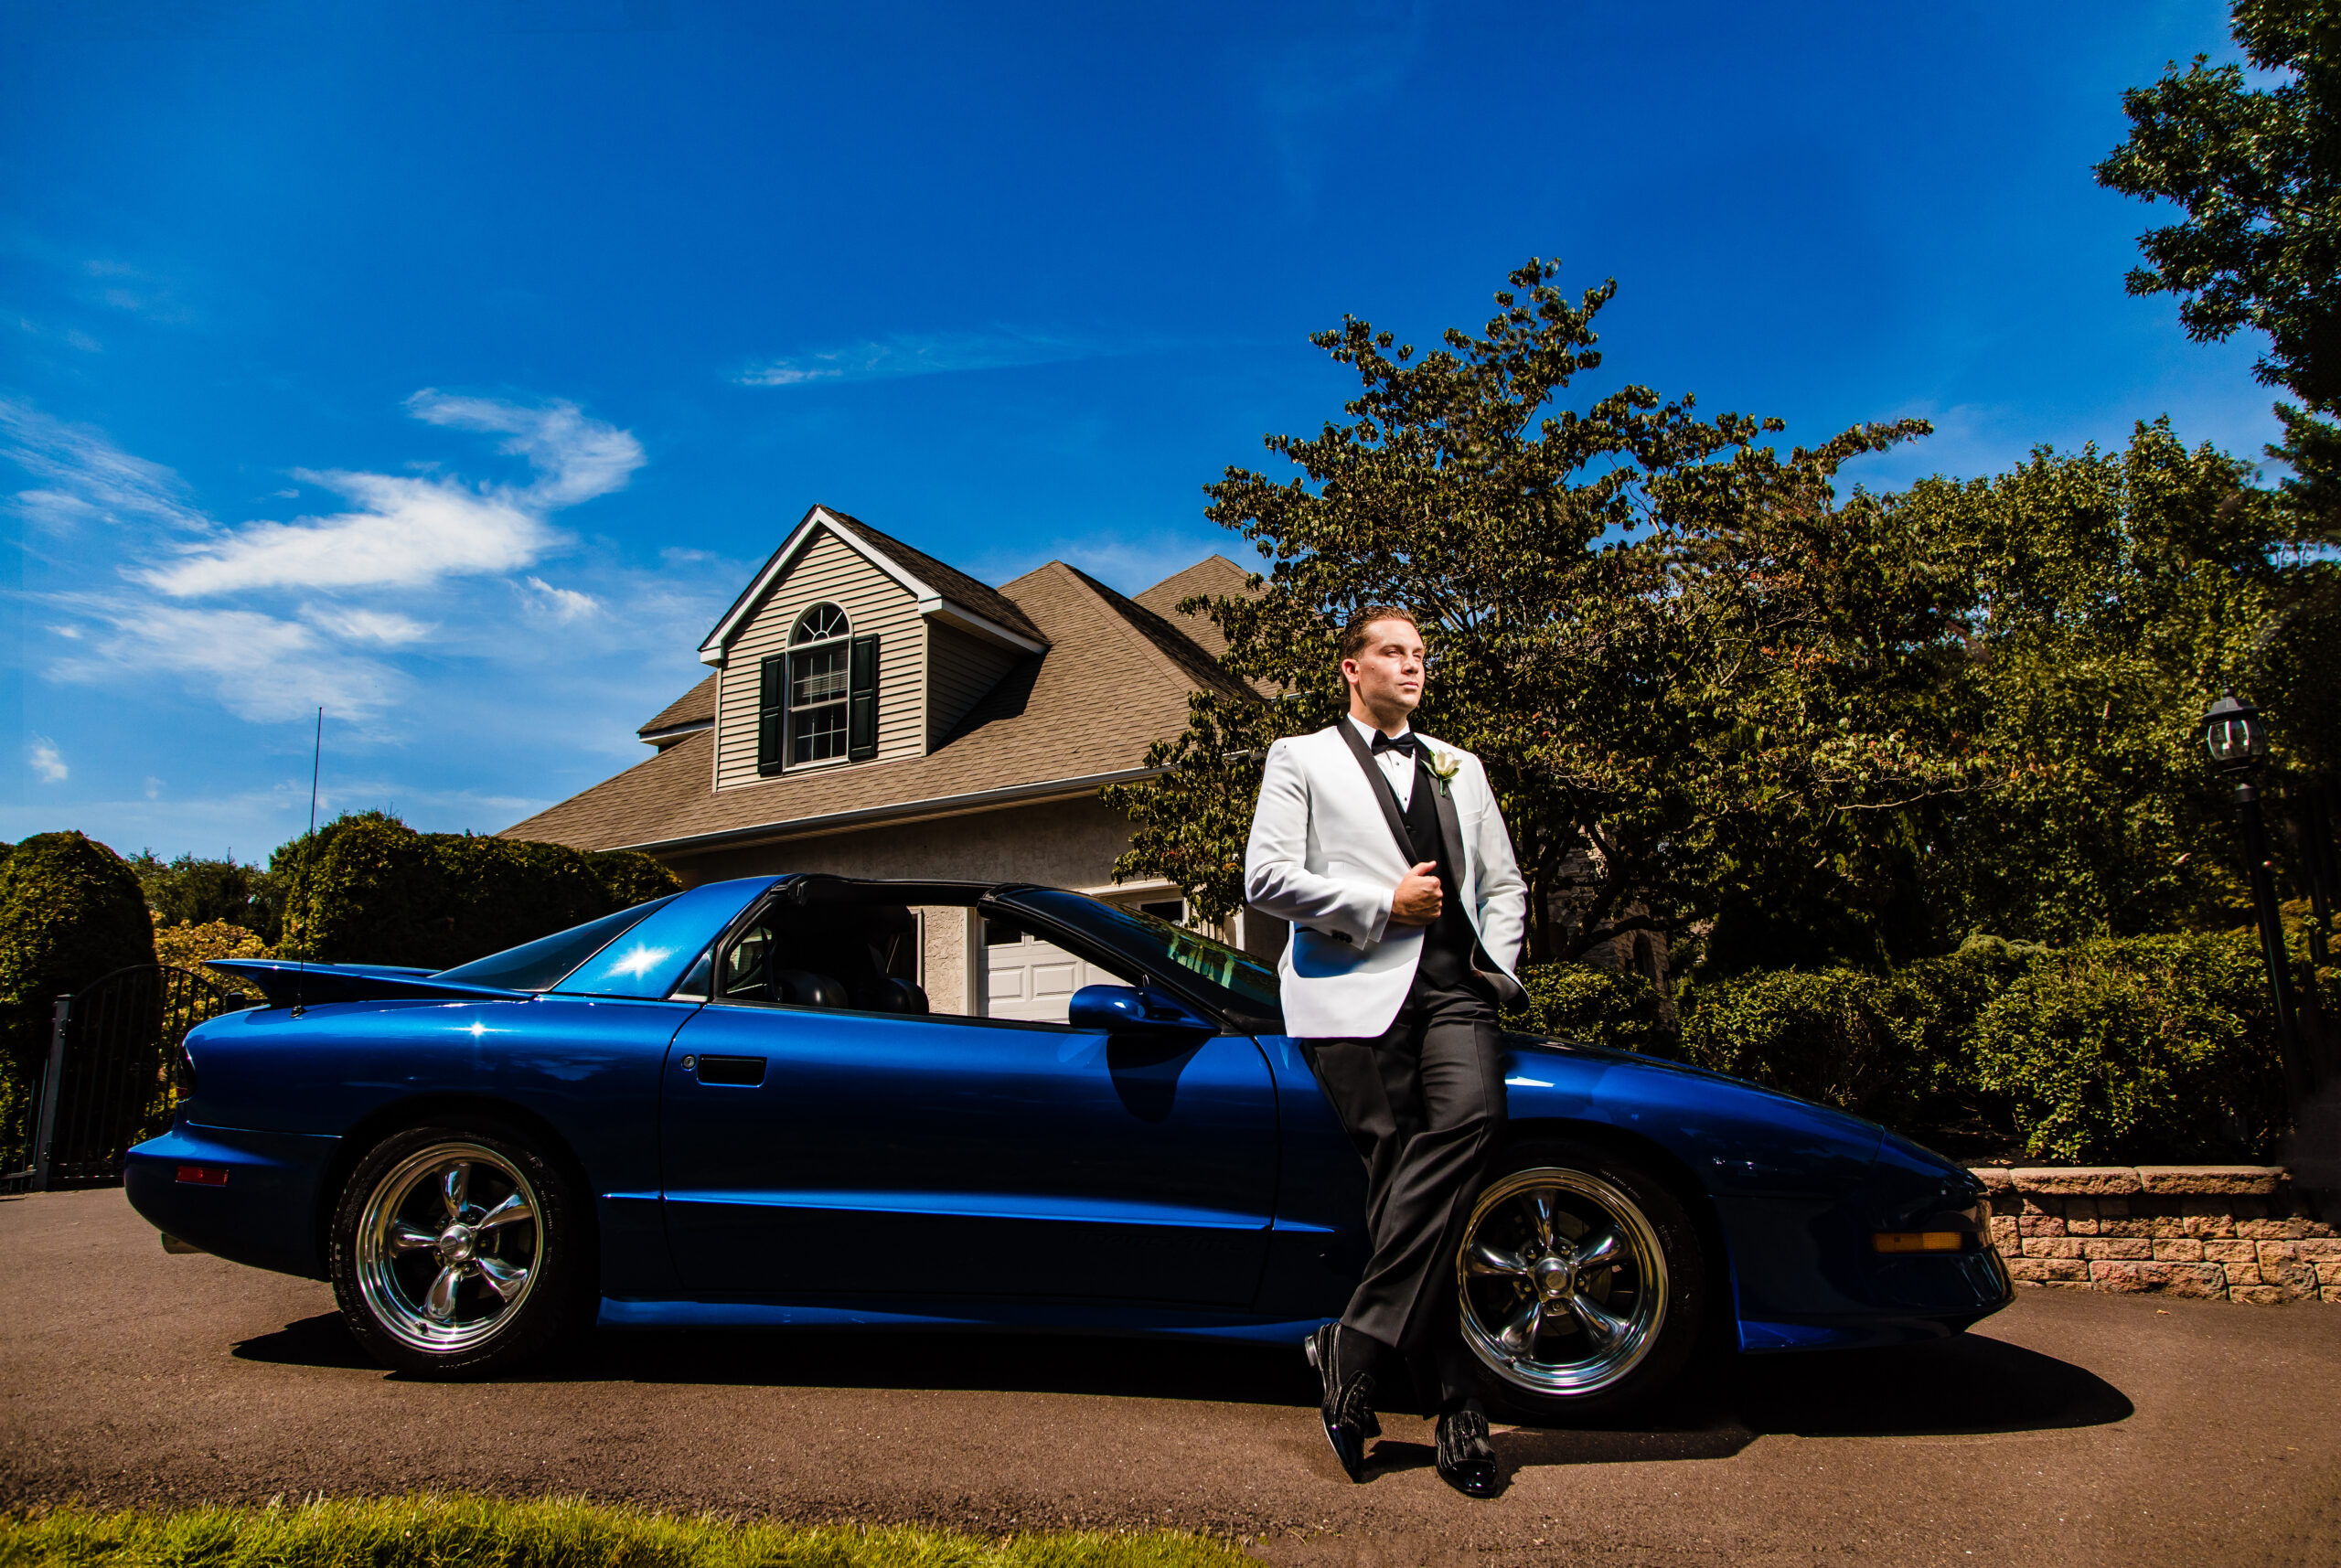 A creatively posed portrait of the groom on his wedding day, proudly standing with his blue convertible car. This stylish and timeless moment was expertly captured by Jarot Bocanegra Photography.